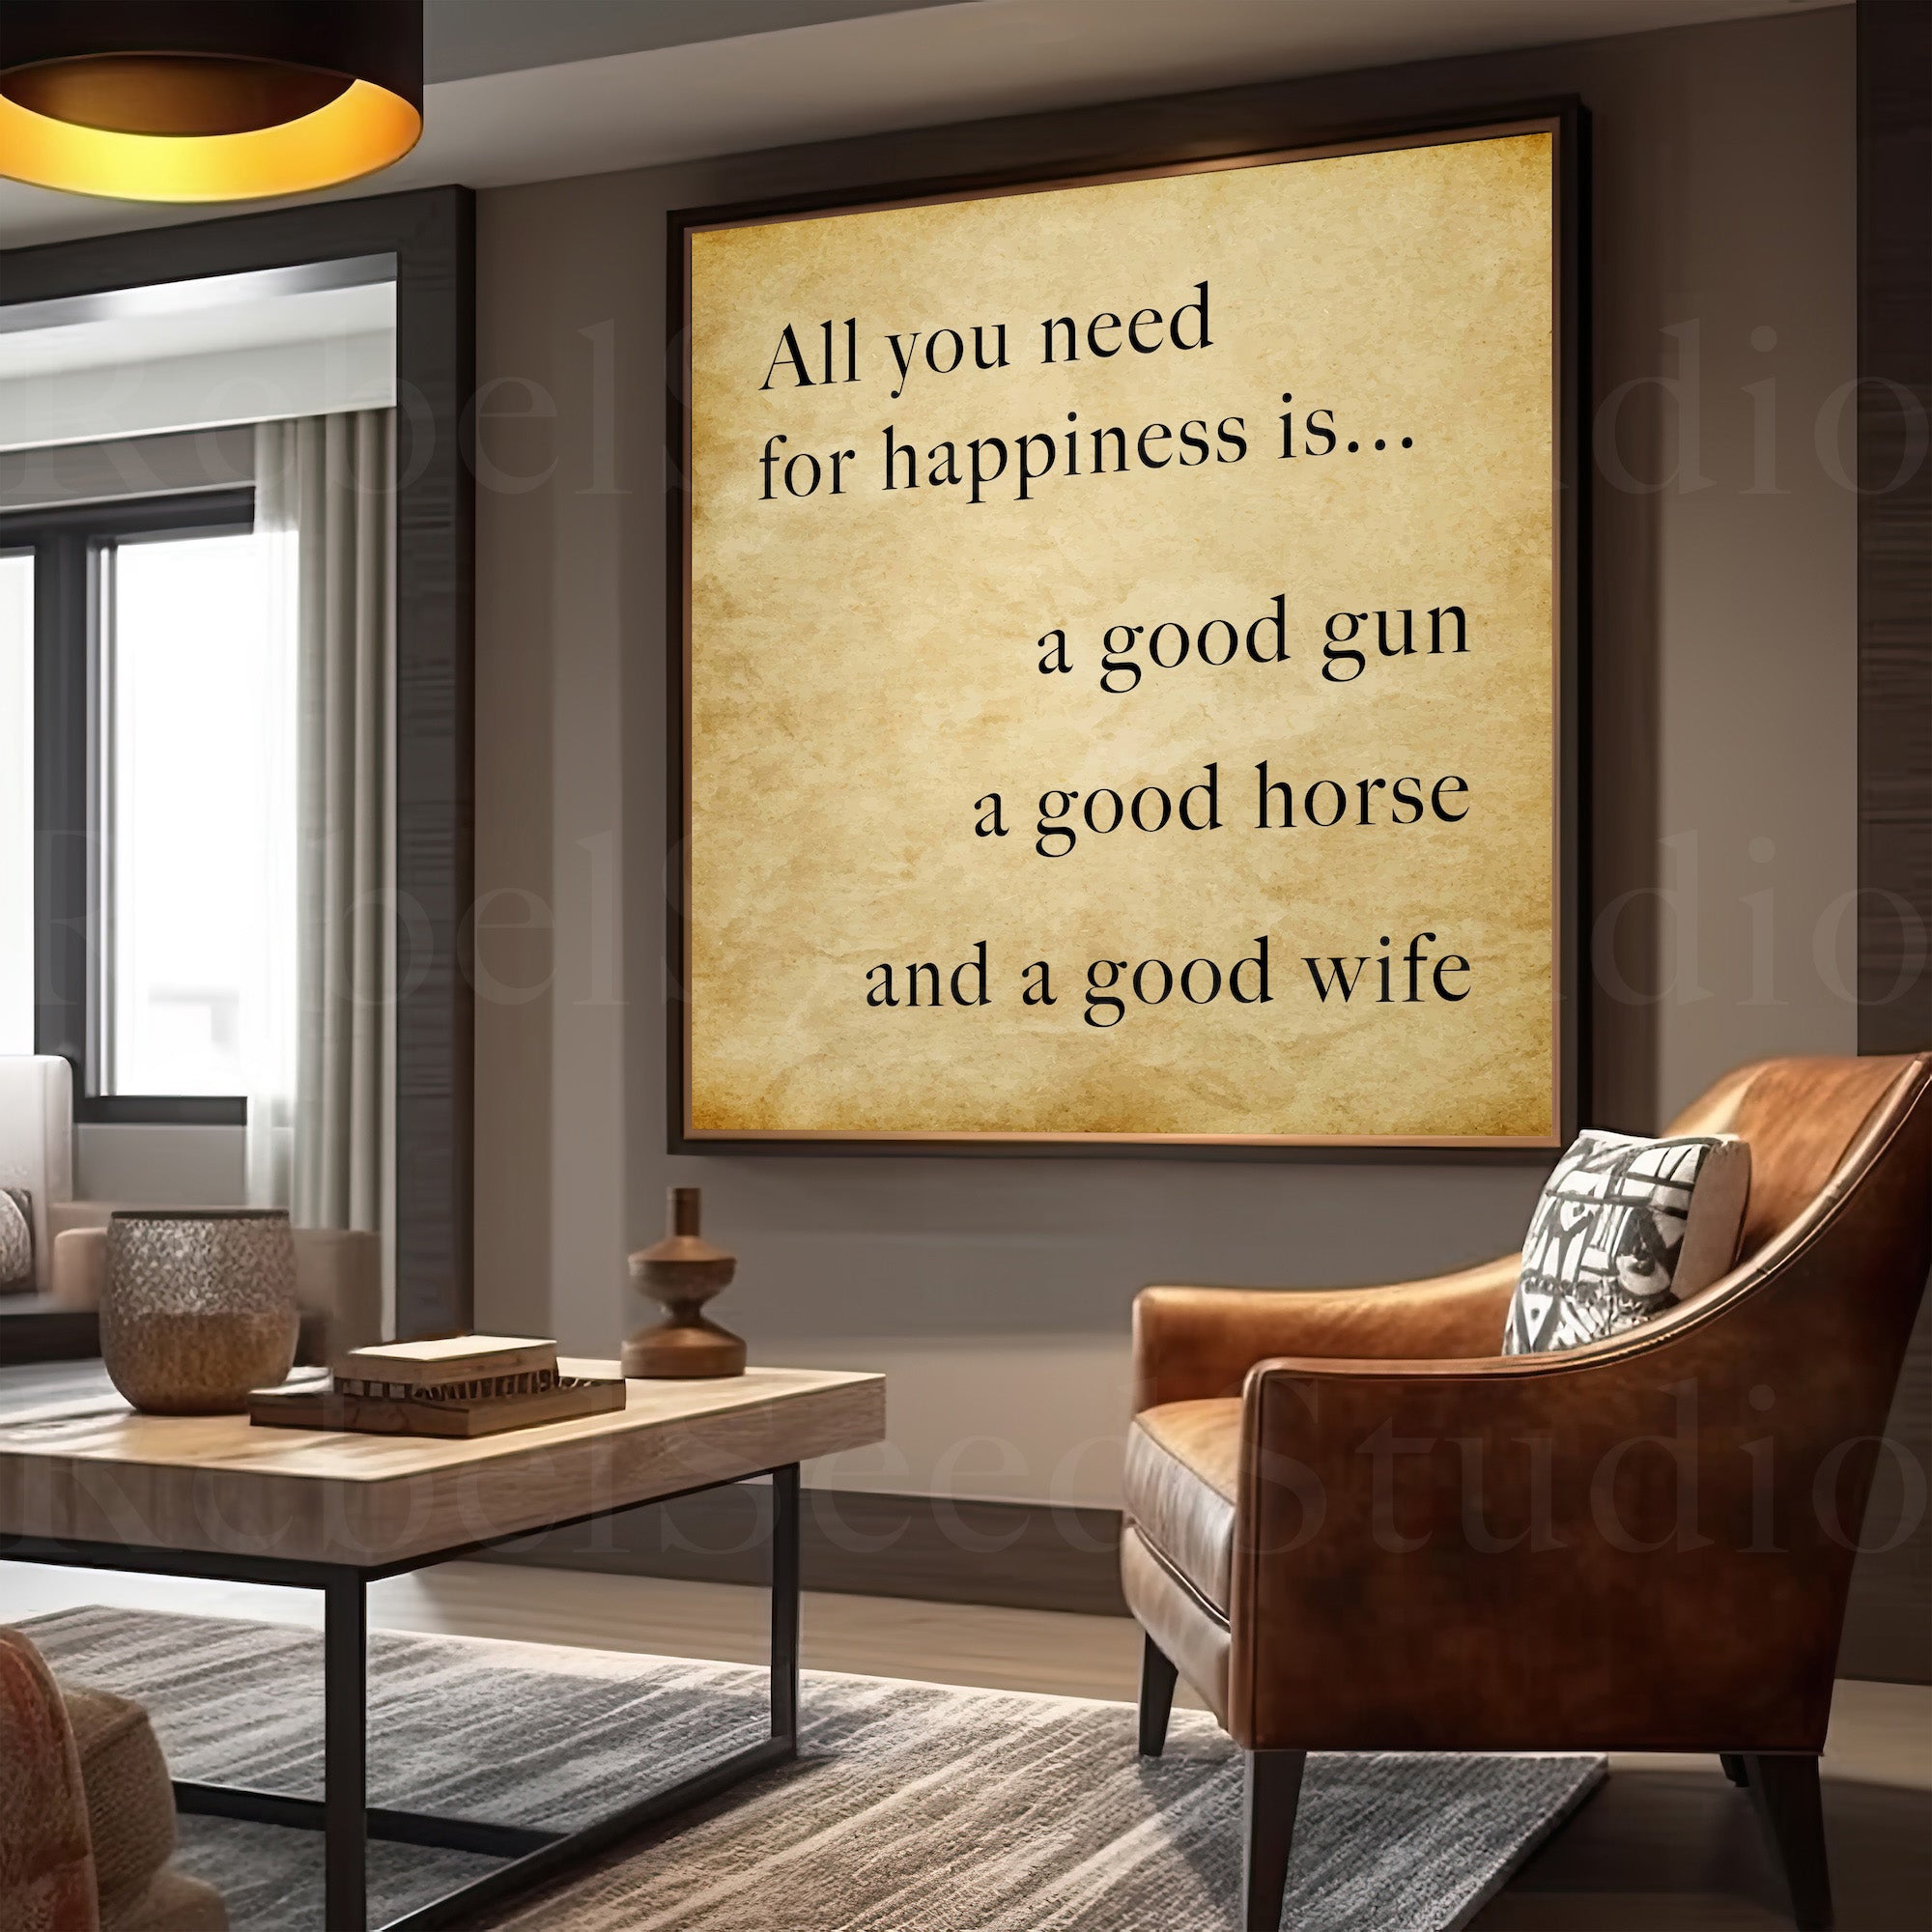 Daniel Boone Quote: All You Need For Happiness Is a Good Gun, a Good Horse & A Good Wife - Wall Art (Metal Print, Archival Print or Poster Print)